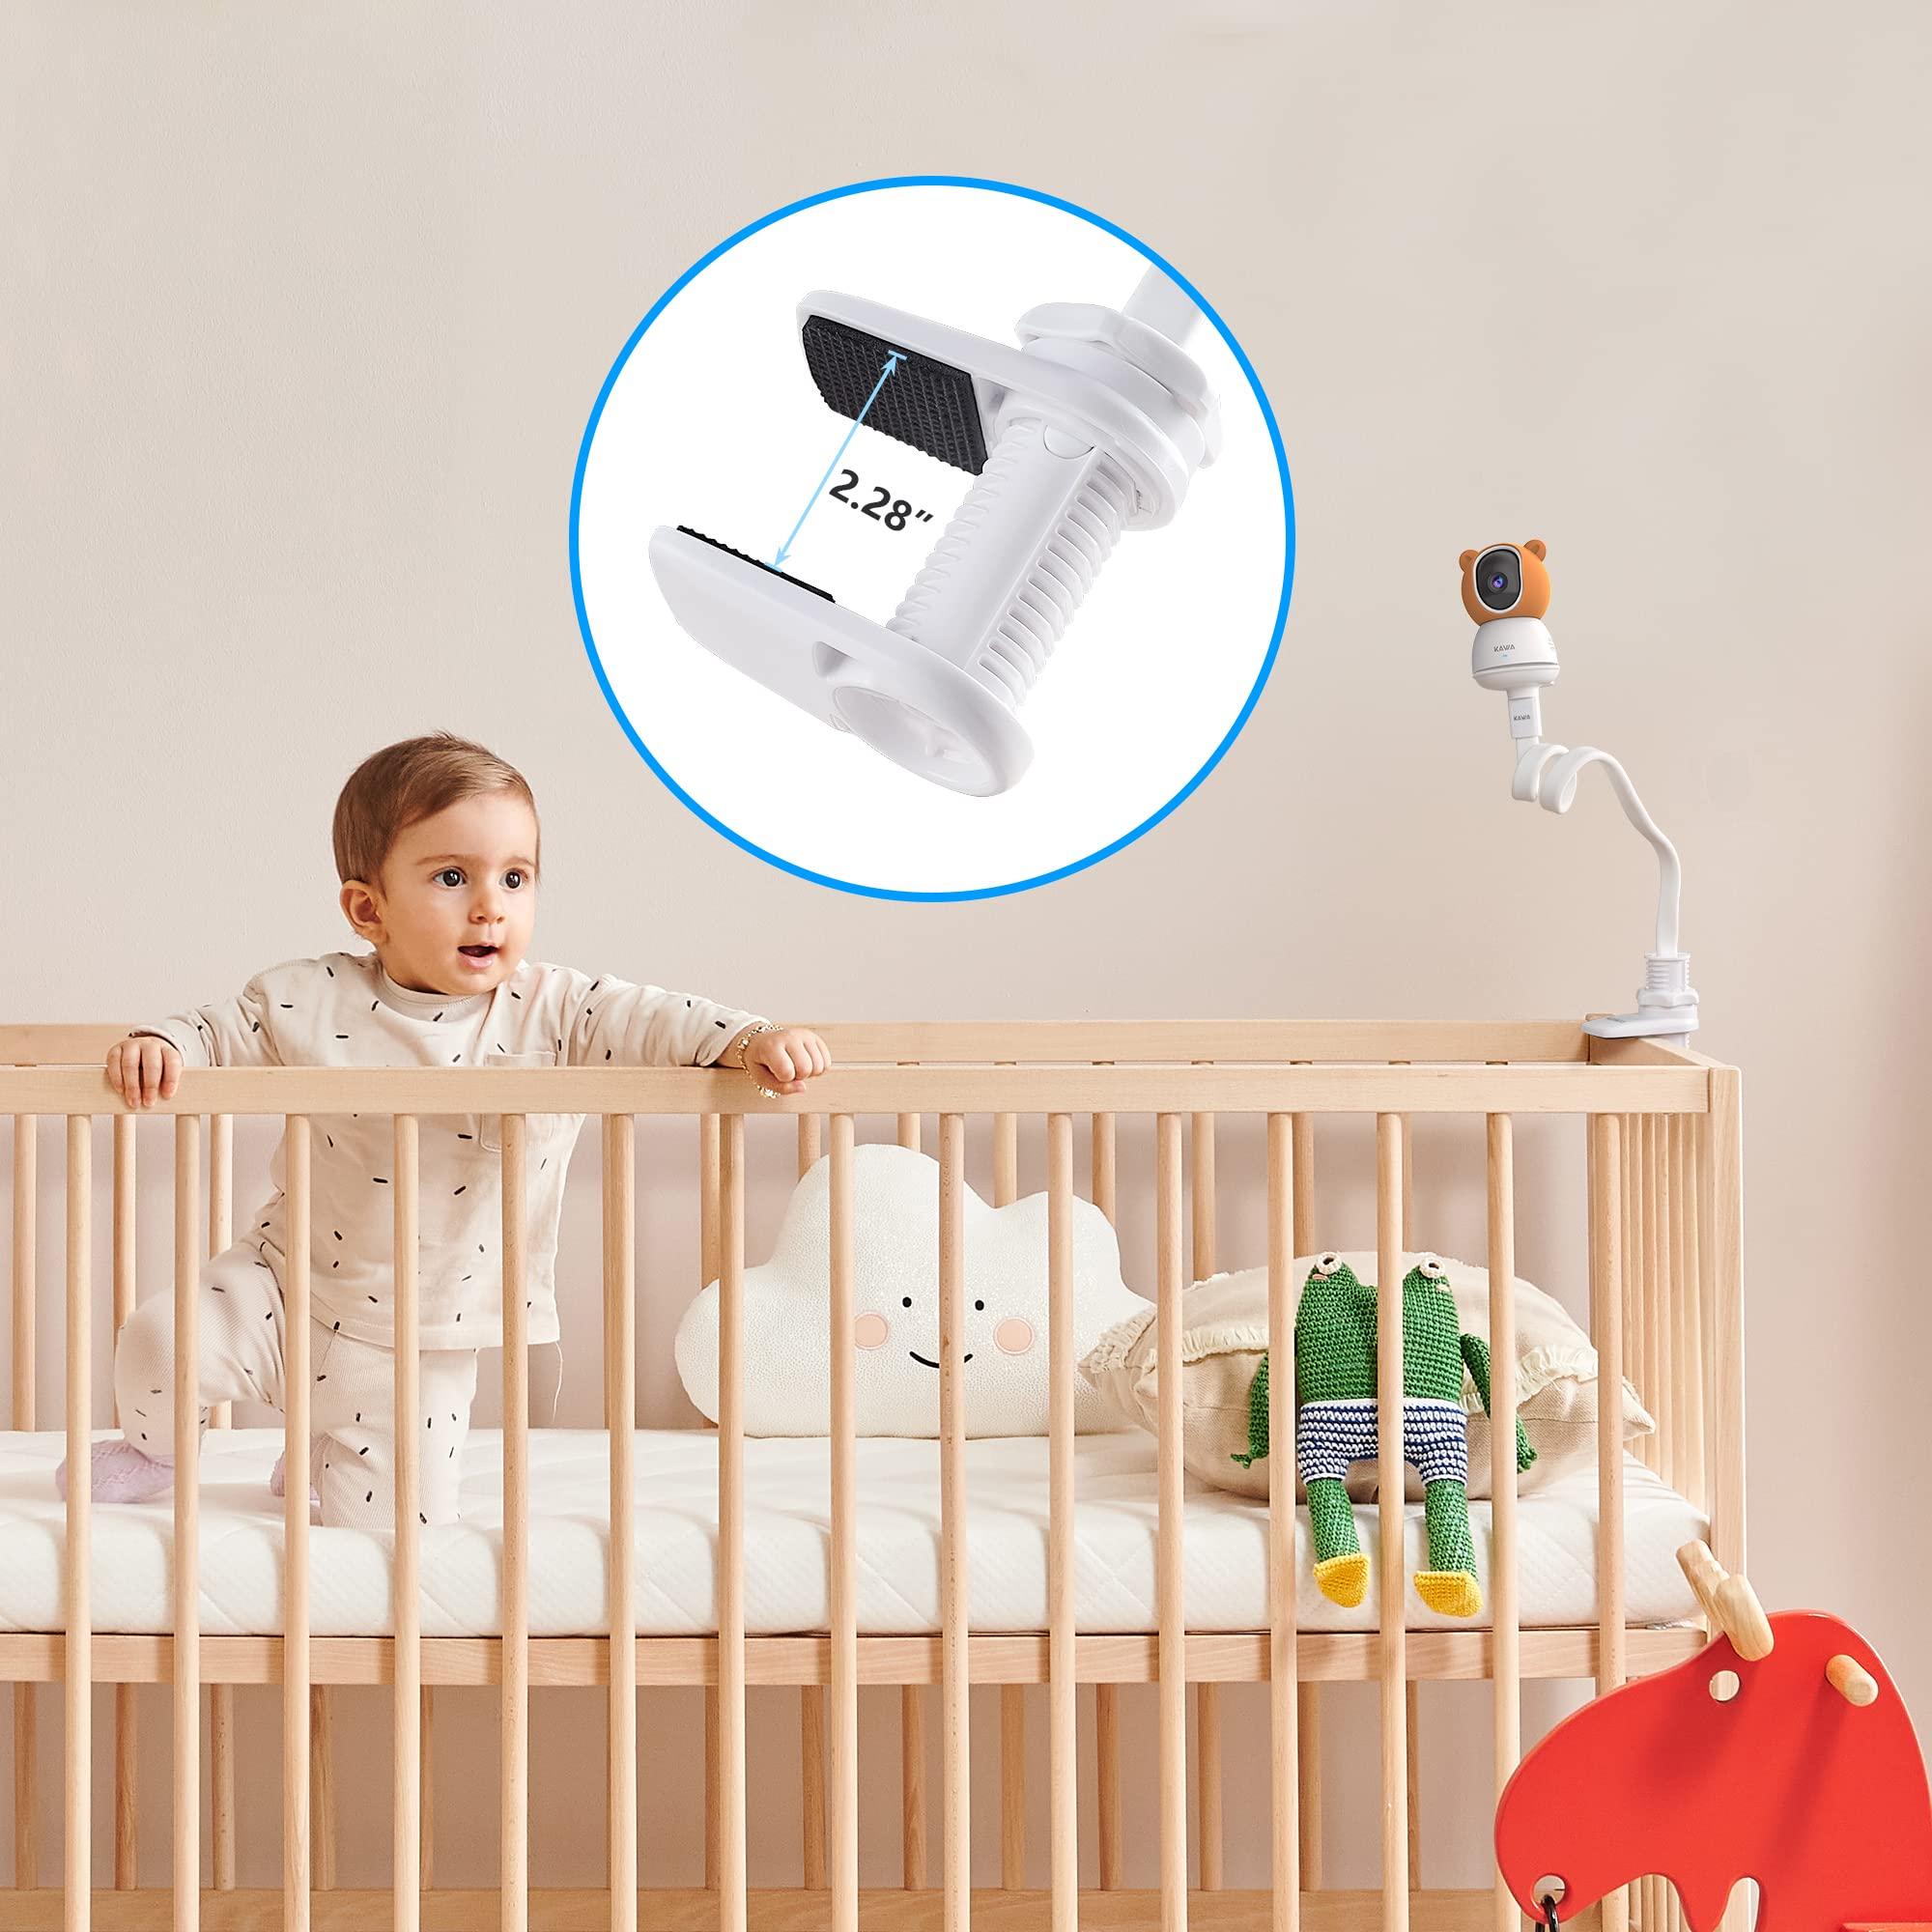 KAWA Baby Monitor Holder, Universal Baby Monitor Mount for Crib, Flexible Baby Monitor Holder, Compatible for All 1/4 Triple Hole Baby Monitor Camera, Without Tools or Wall Damage 4